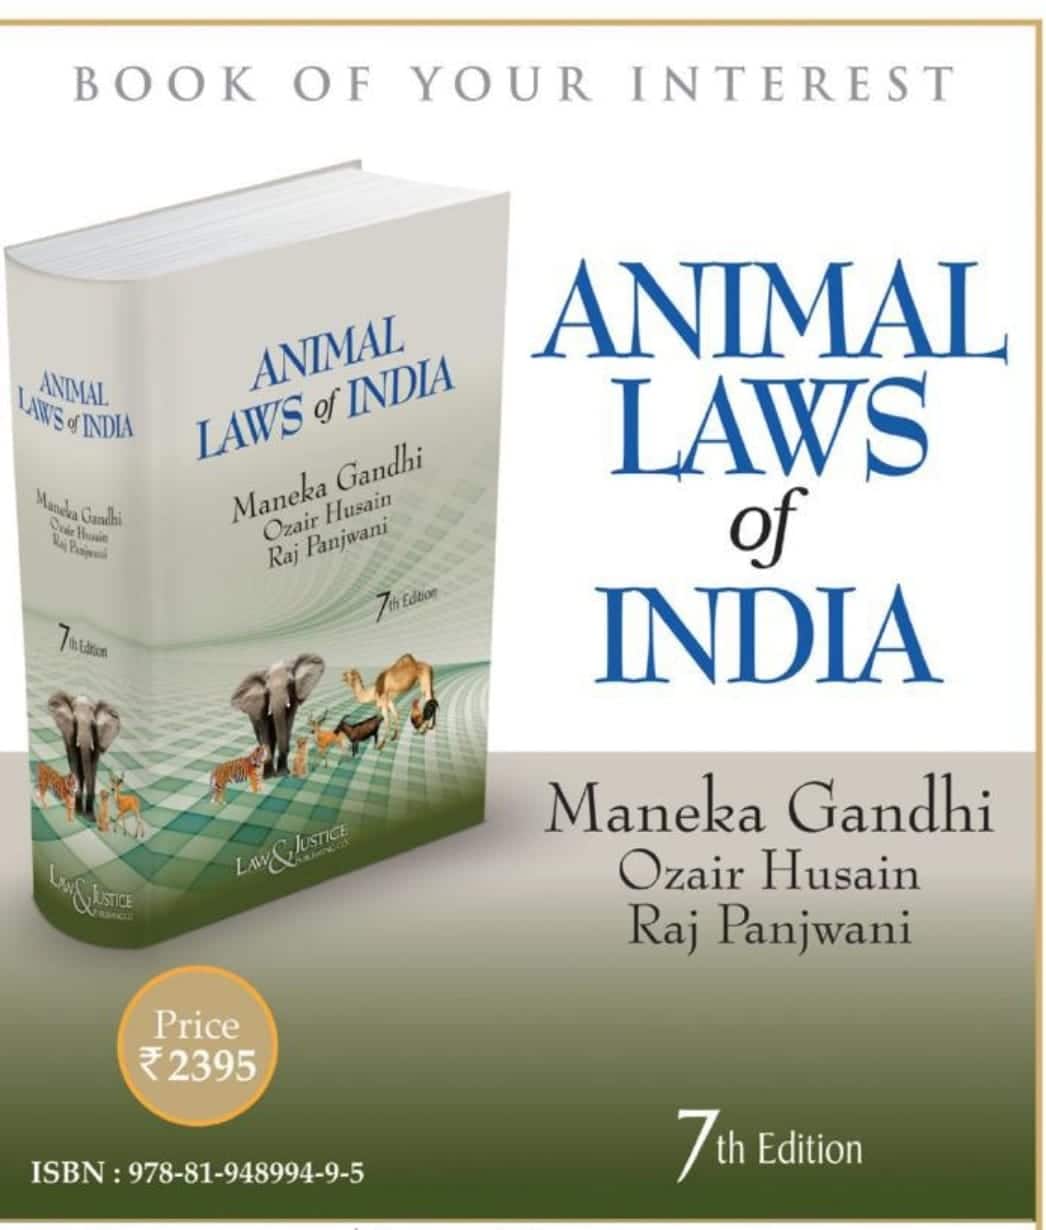 Animal Laws of India by Maneka Gandhi - 7th Edition 2021